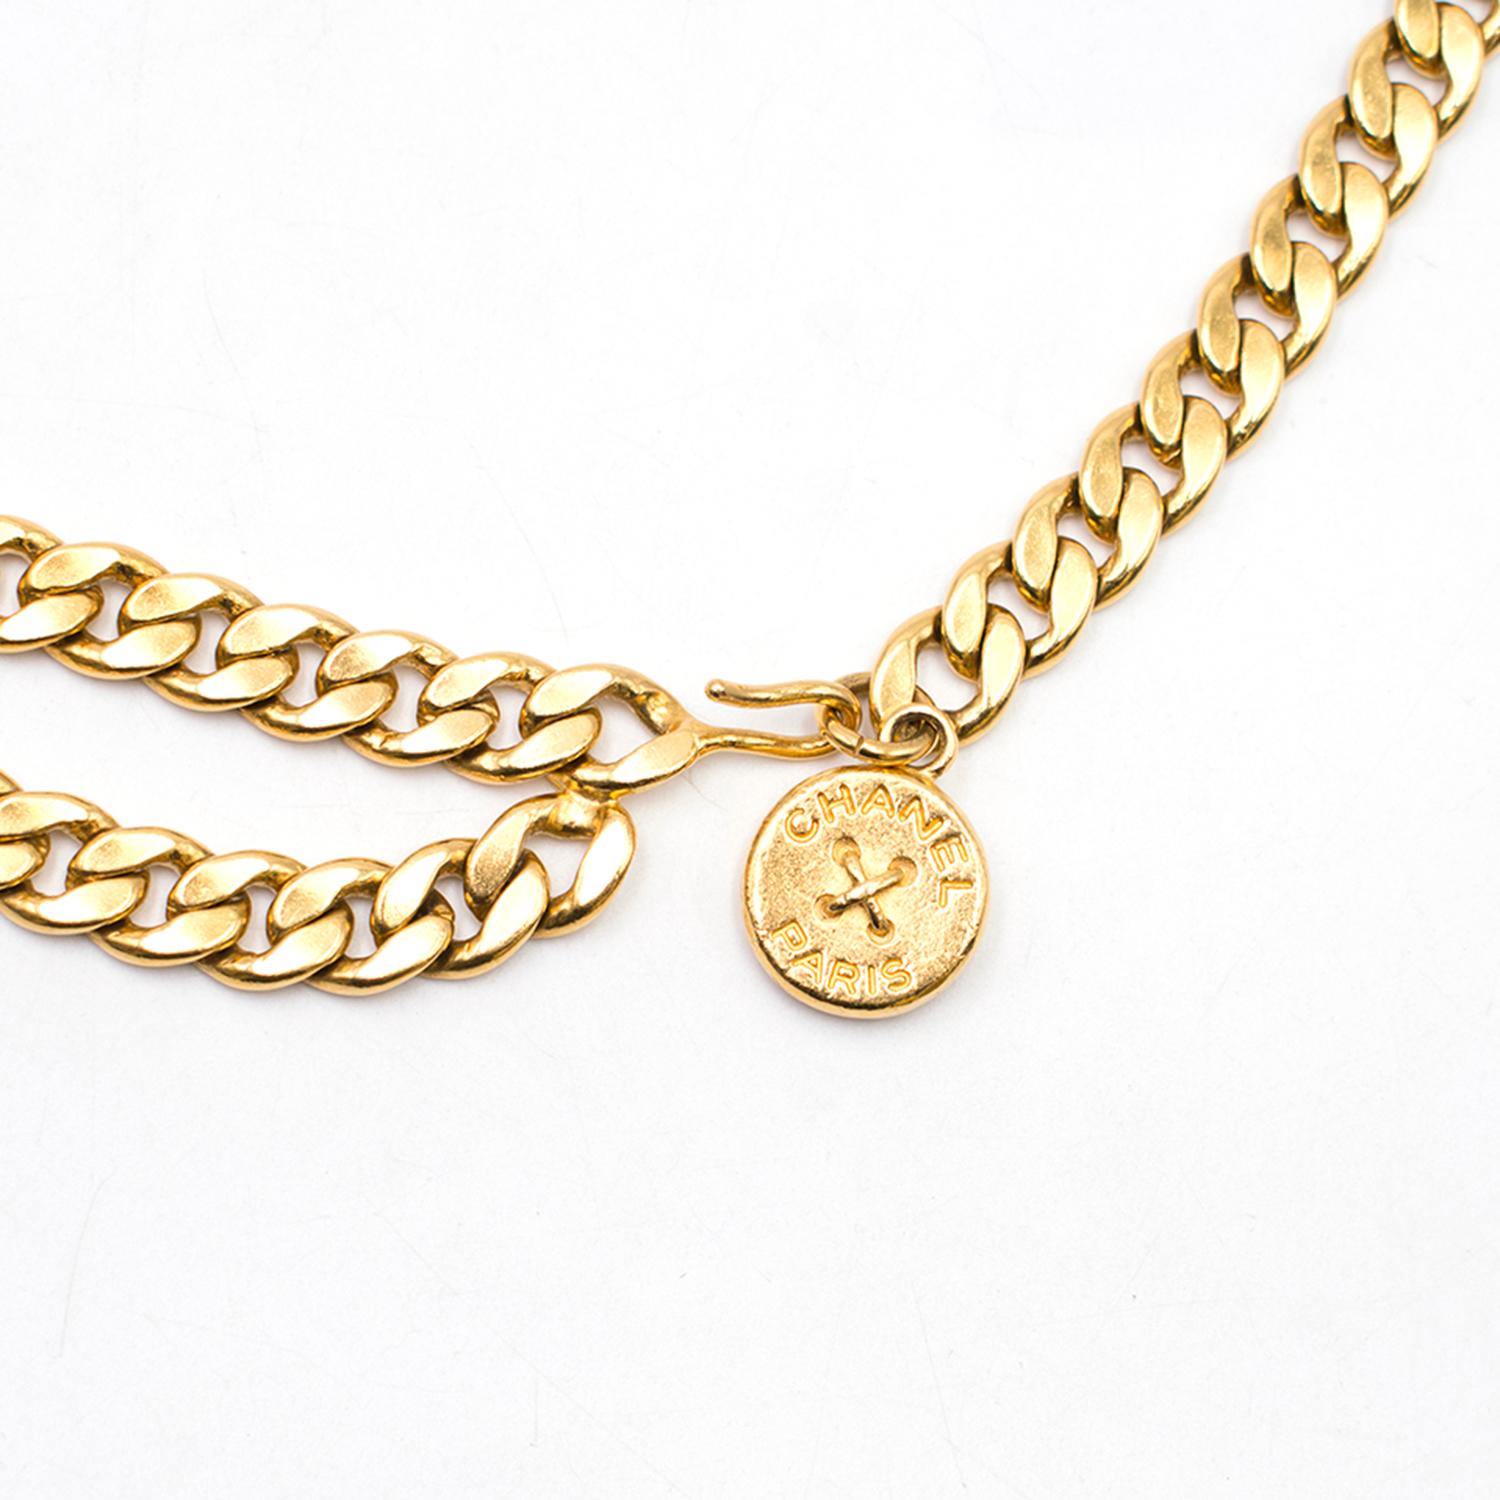 Chanel Vintage 1994 Gold-plated Chain Belt & Necklace

- Yellow gold-plated chunky chain
- Can be worn as both a belt or a necklace (Please see all images)
- Hook closure
- Coin style Chanel branded charm
- Rare & vintage collectors piece from 1994